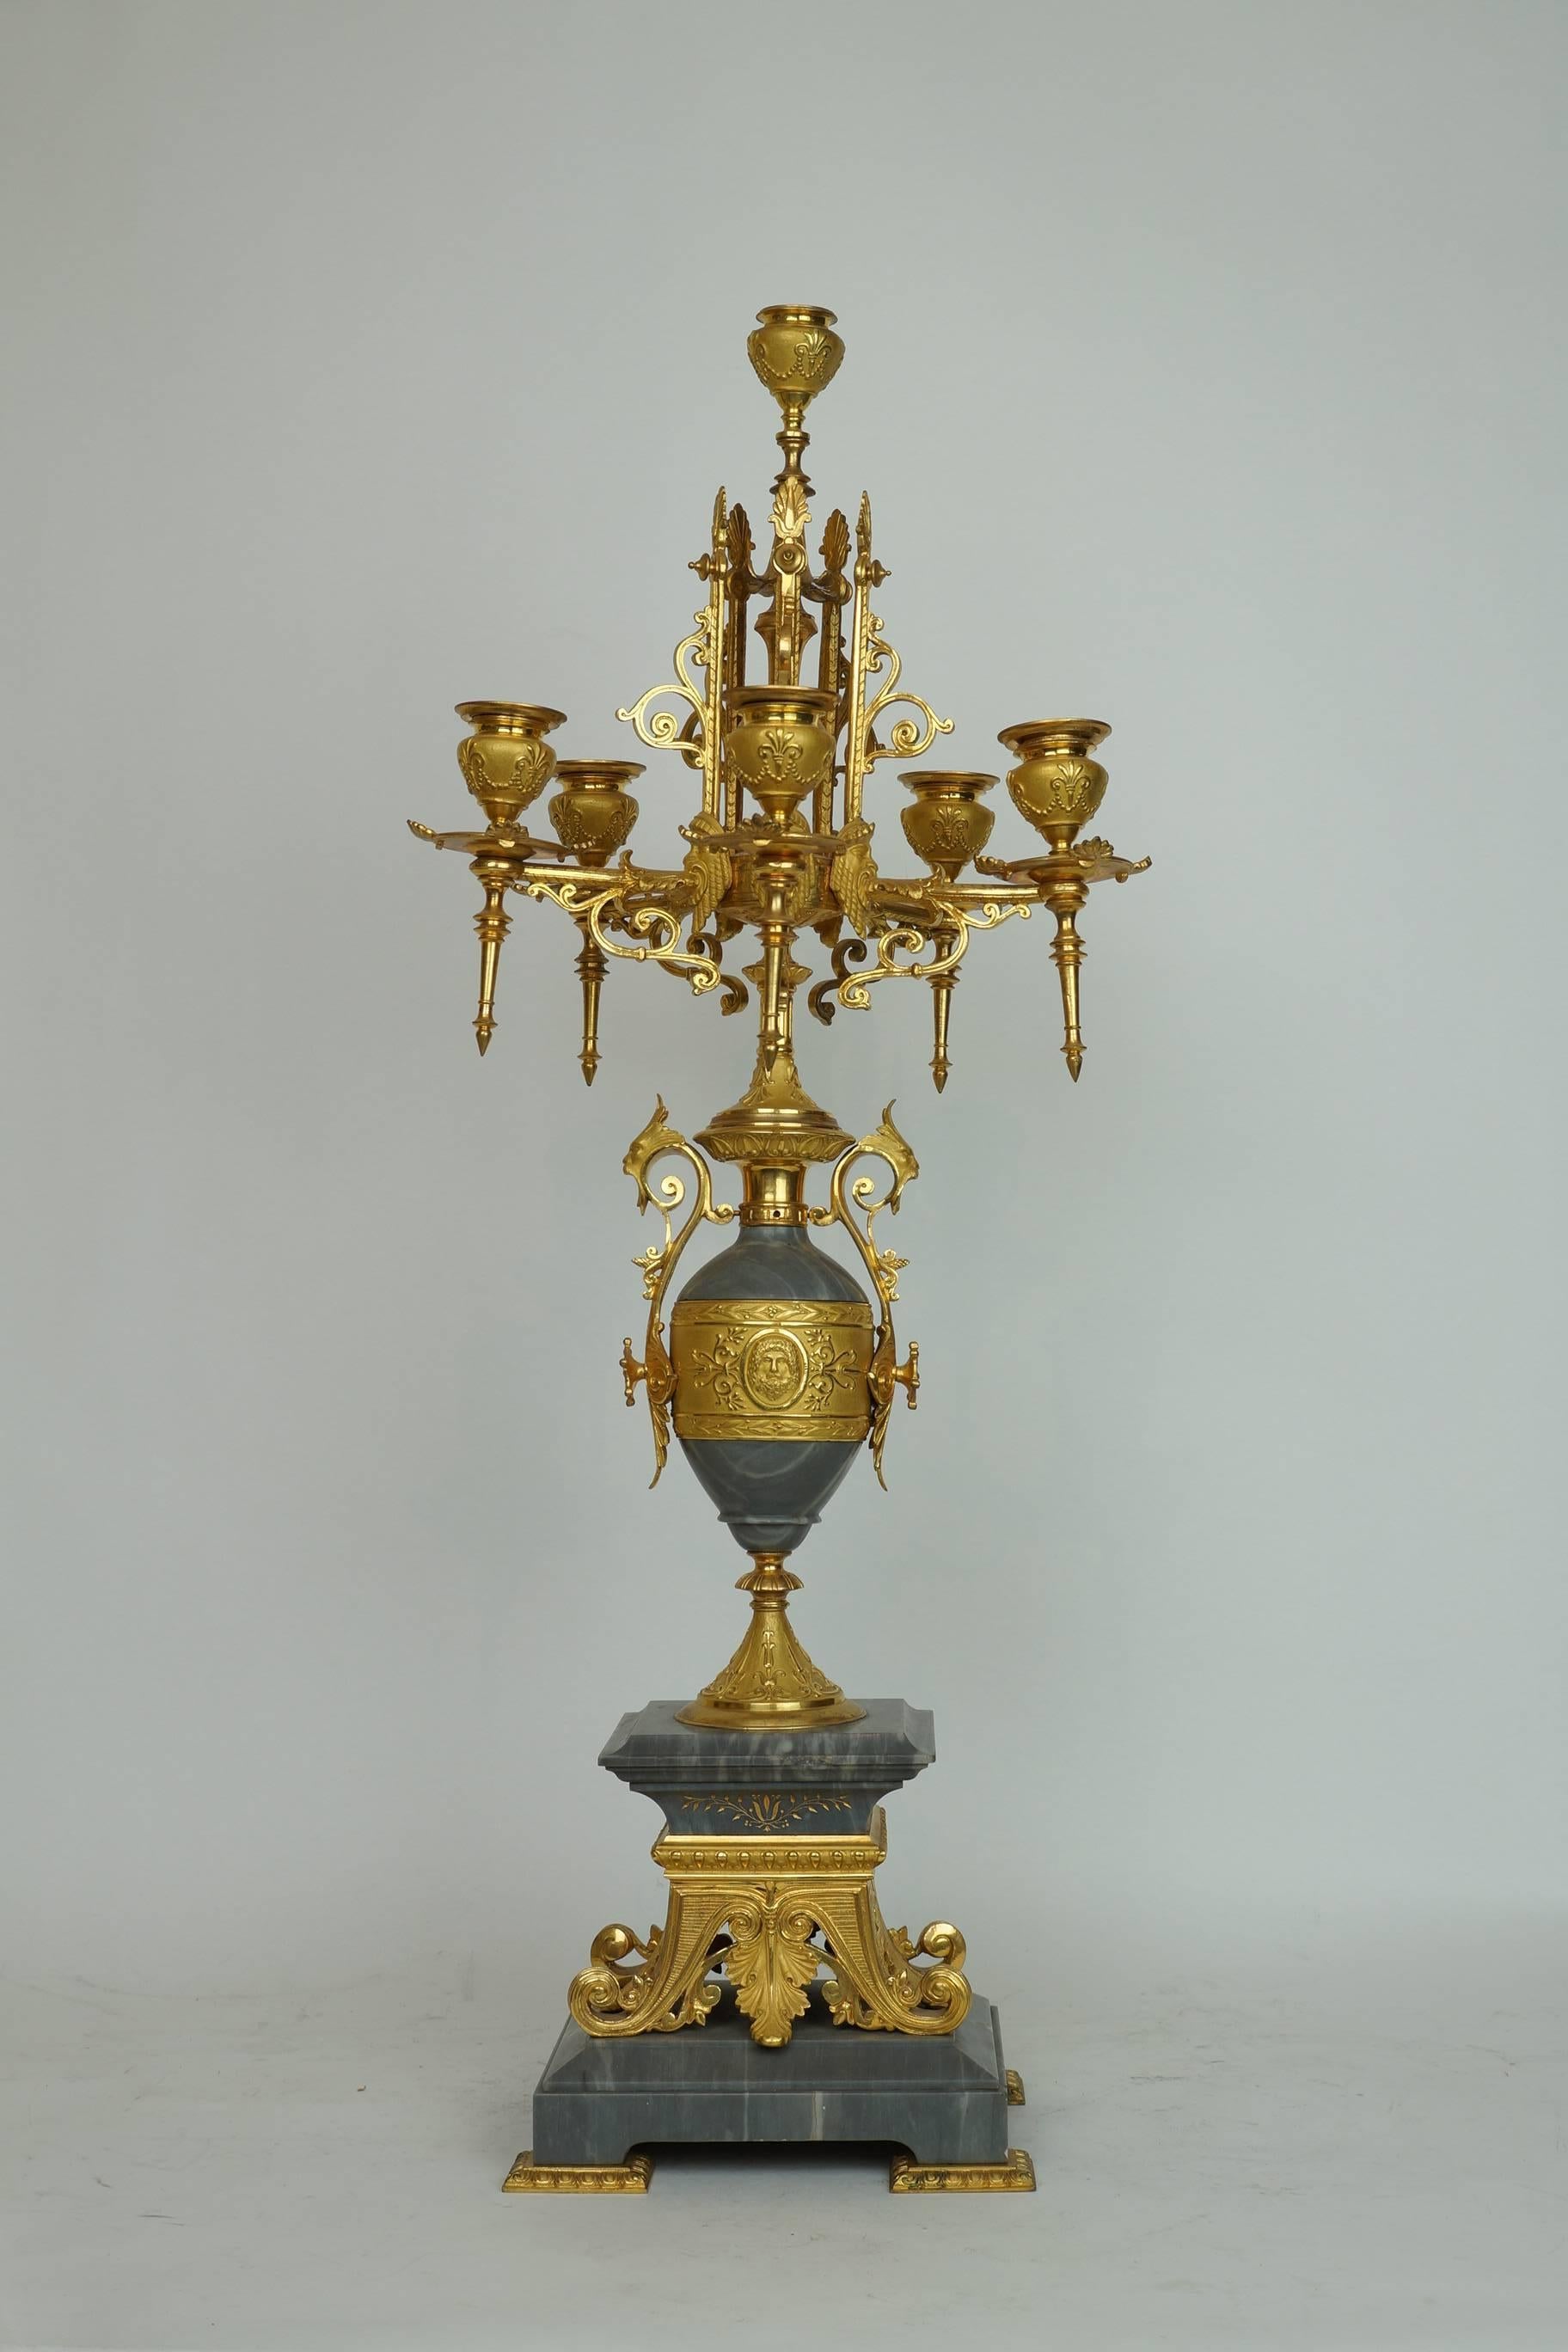 Pair of French 19th century candelabra of the finest quality in the Greek Revival style, exceptionally cast and gilt, with bleu turquin marble.